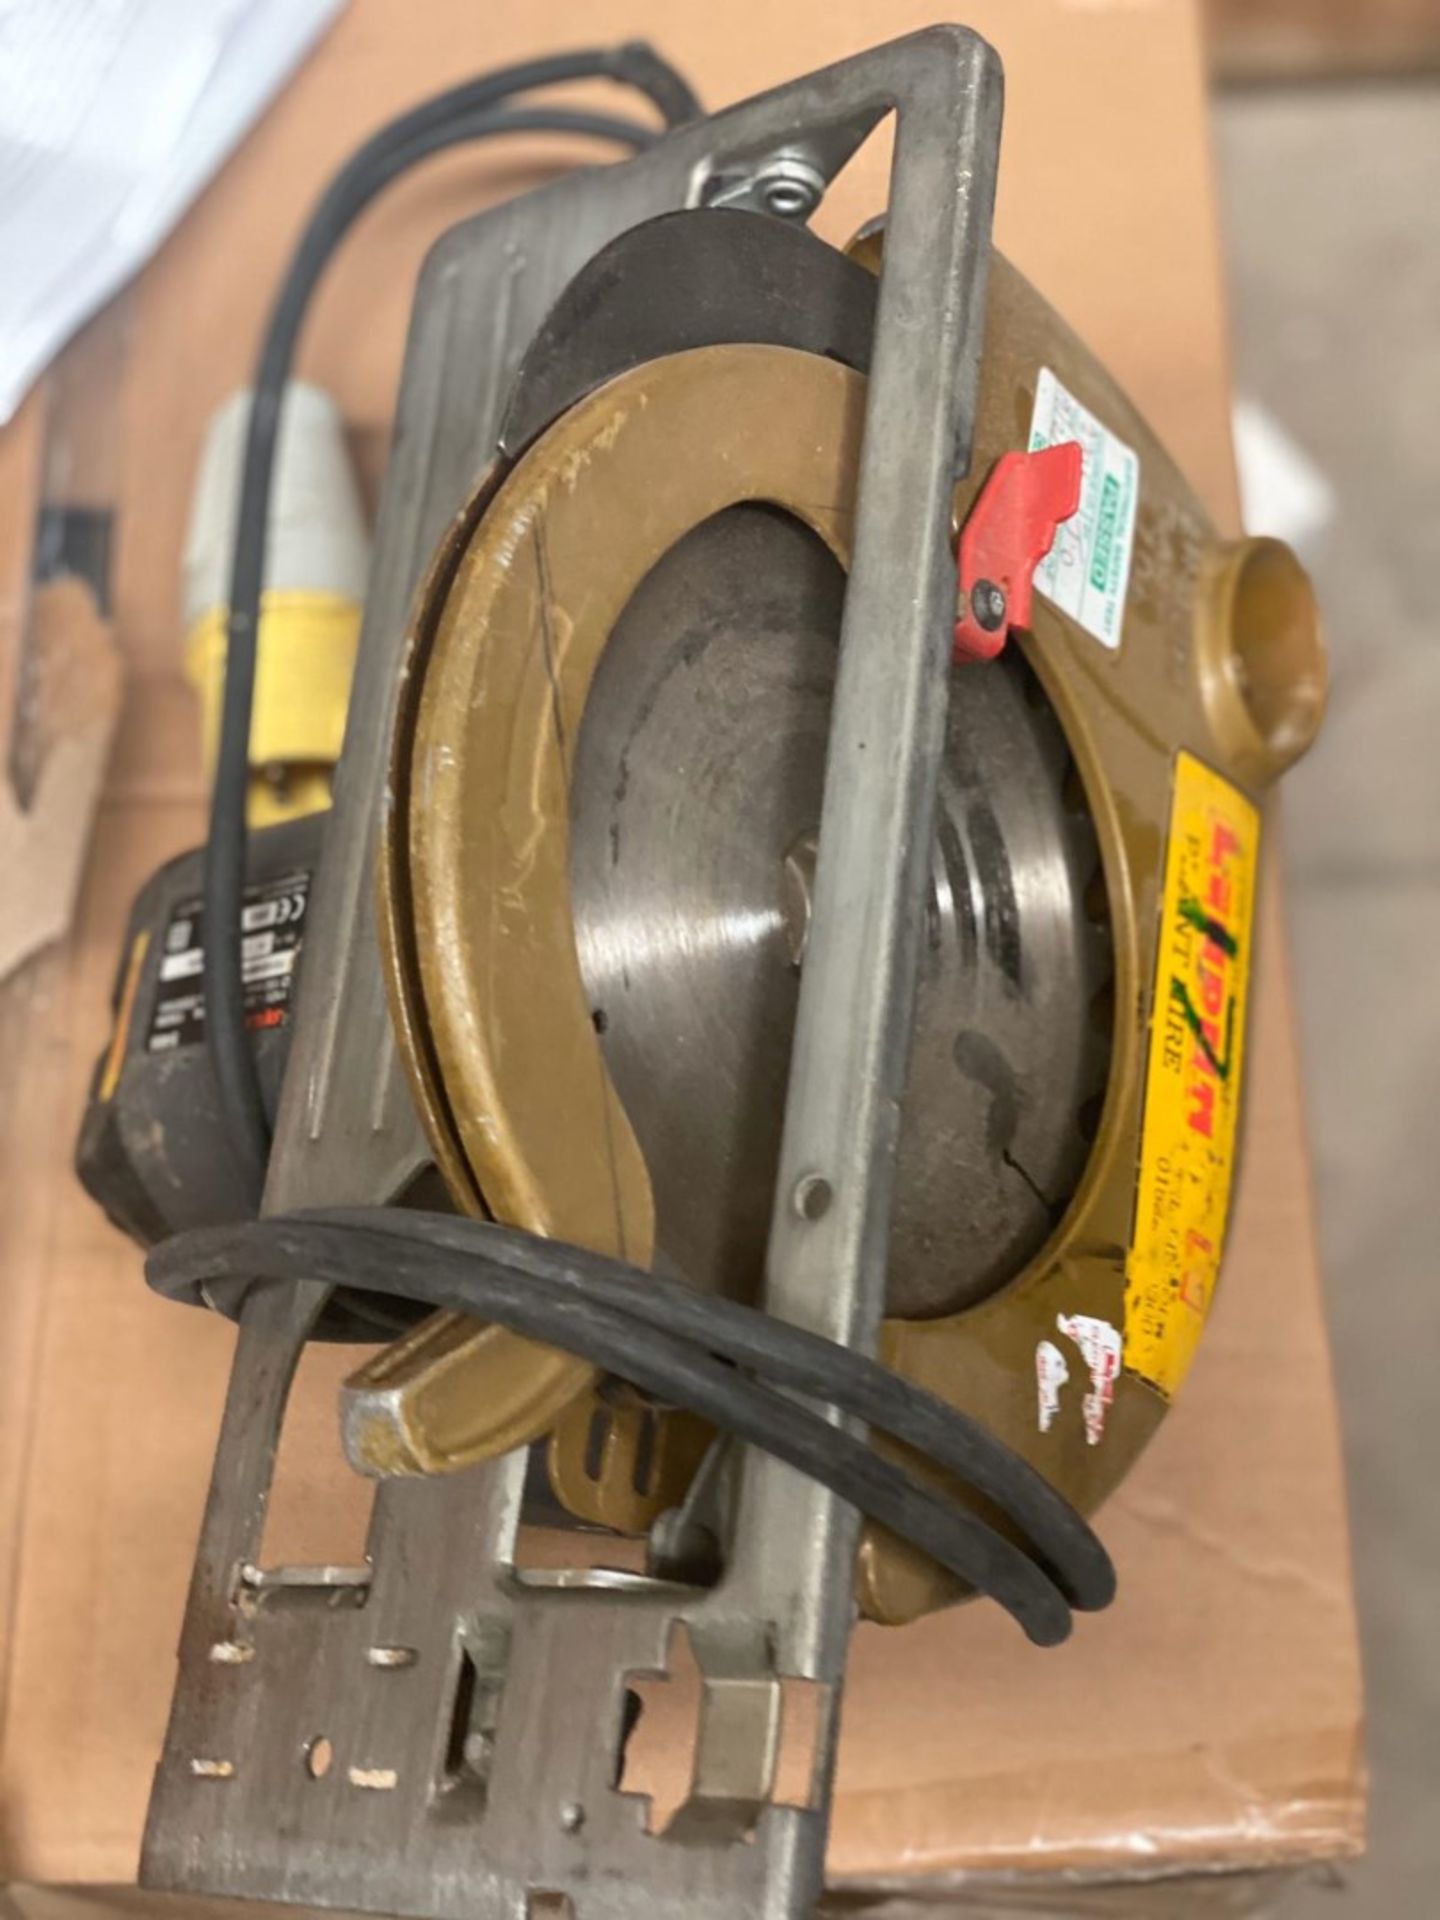 1 x Skill 110v Saw - Used, Recently Removed From A Working Site - CL505 - Ref: TL017 - Location: - Image 3 of 3